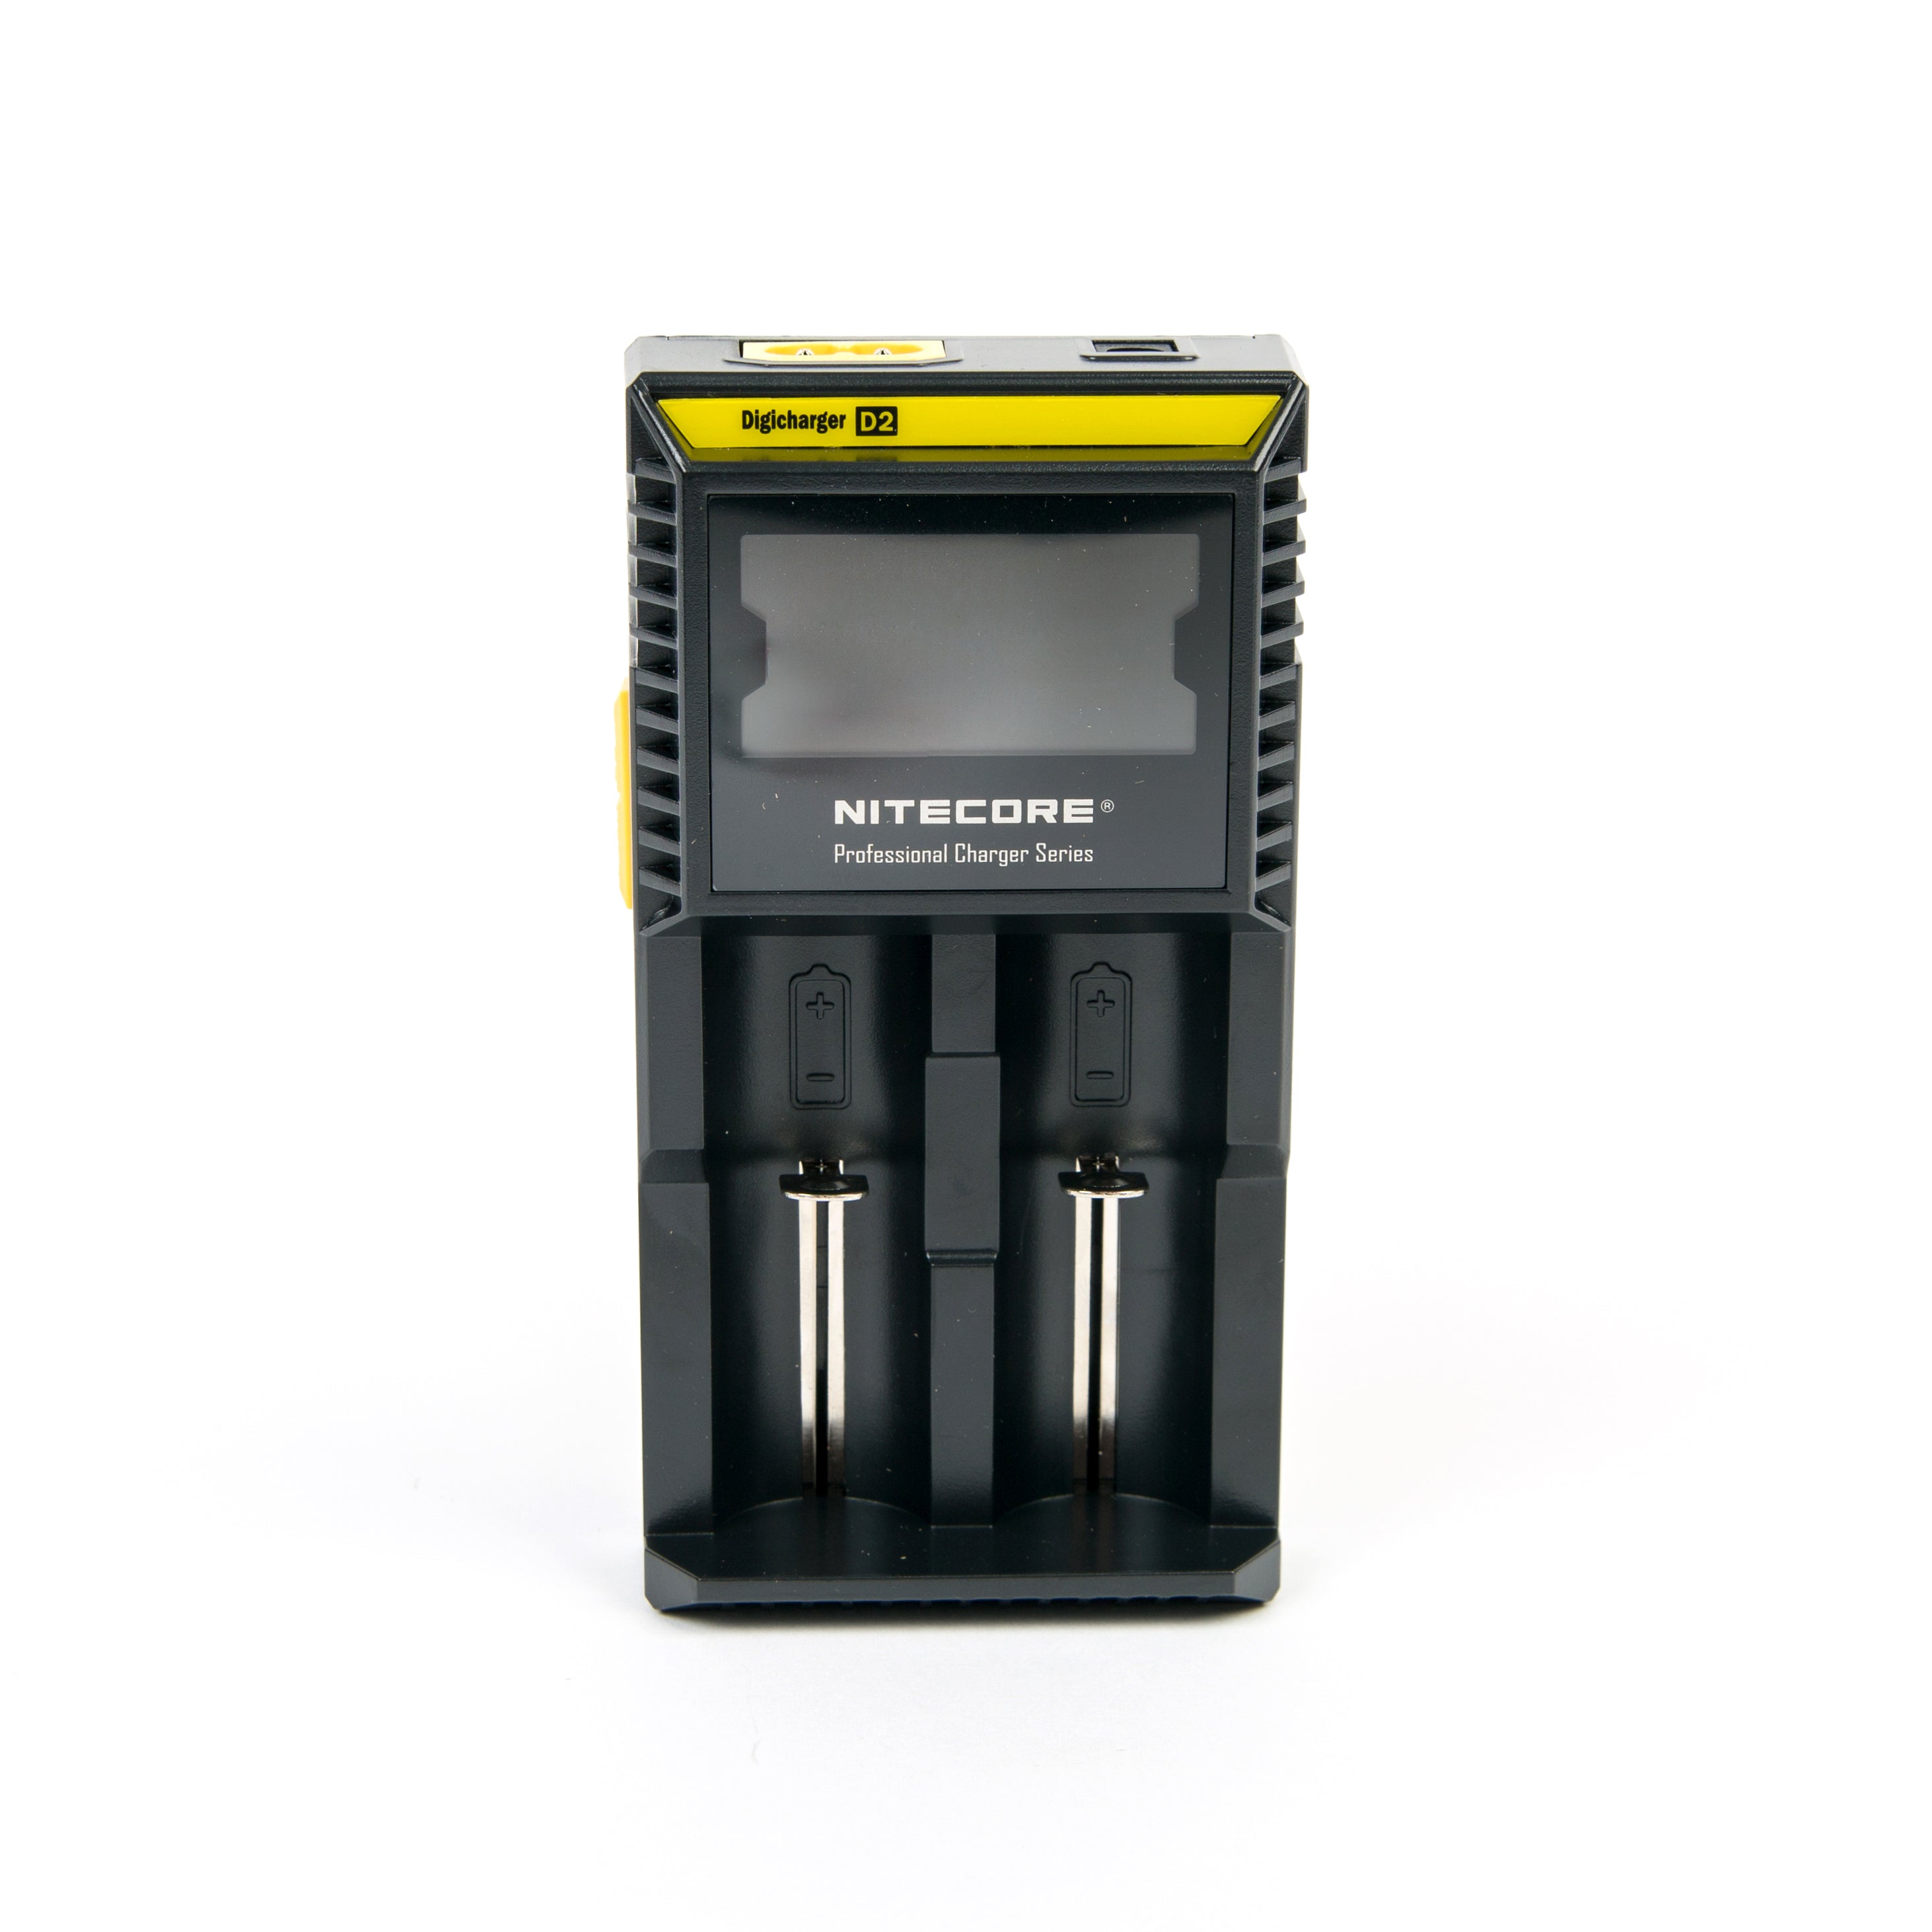 Nitecore D2 2-bay Digital Lithium Ion Battery Charger – Liion Wholesale  Batteries